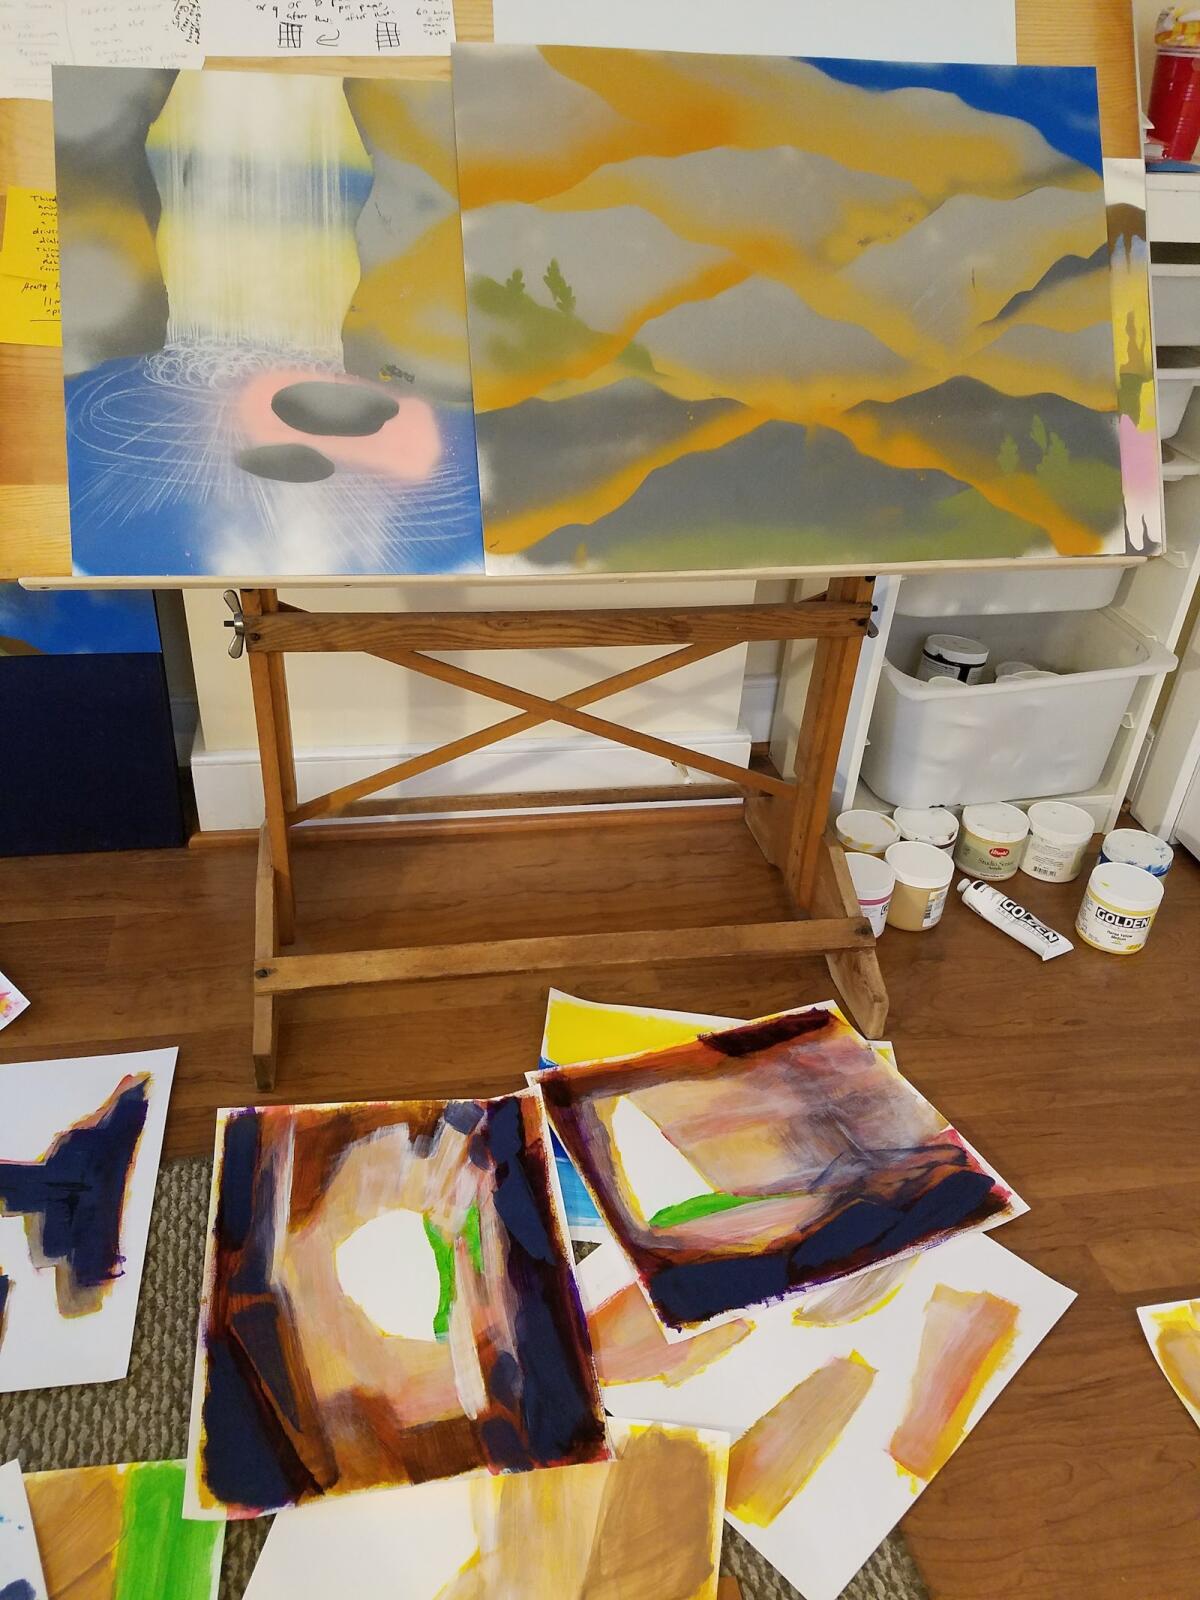 Paintings on a drawing table and the floor around it.